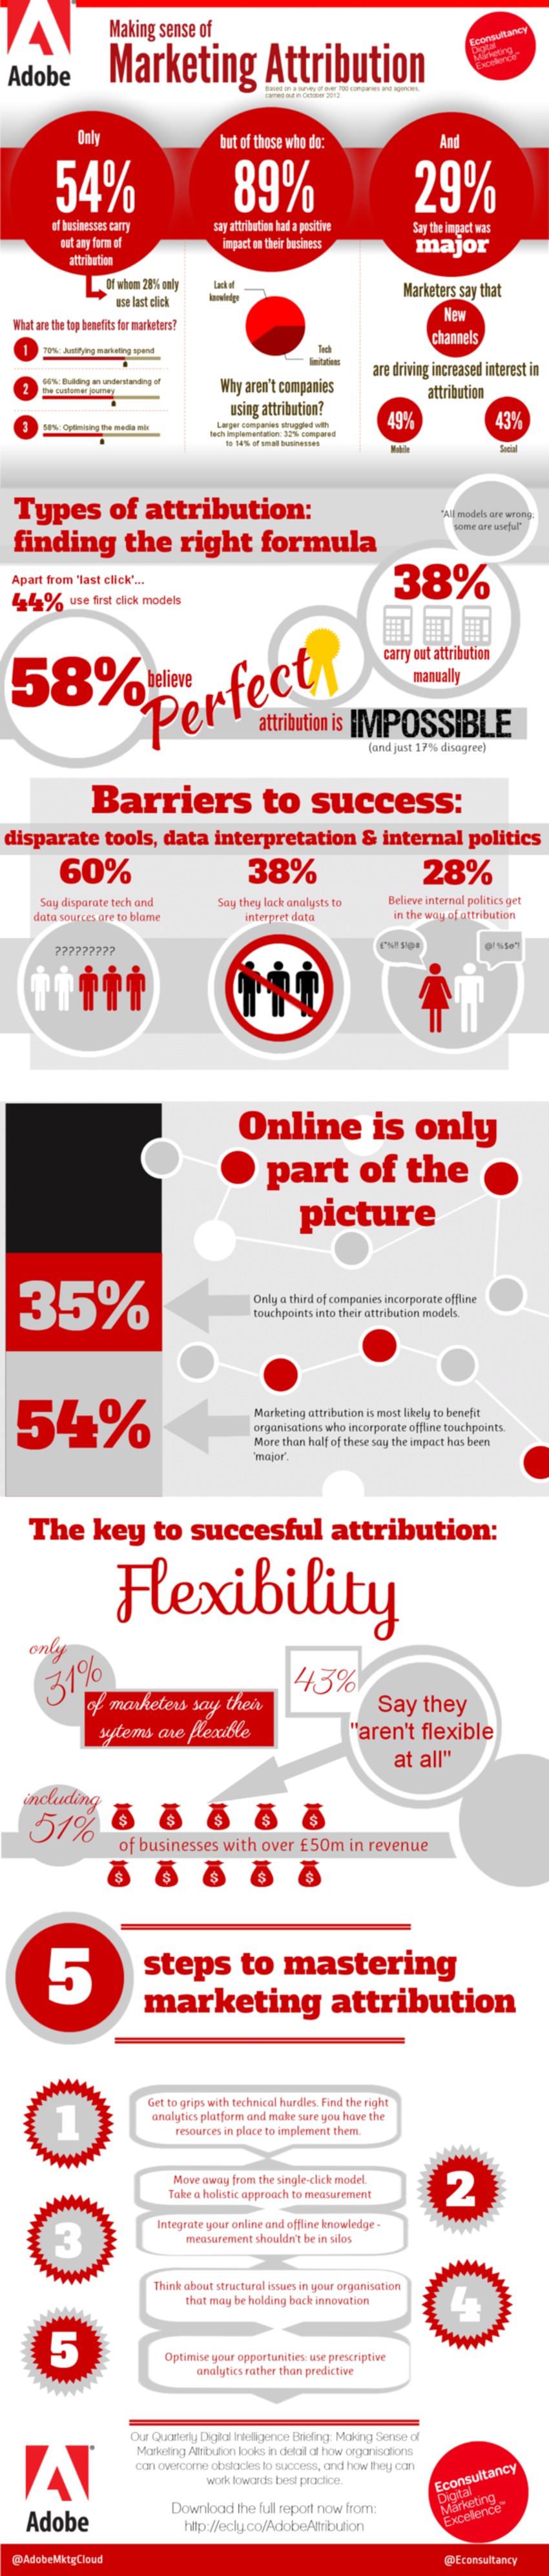 Making sense of marketing attribution [infographic] | The MarTech Digest | Scoop.it